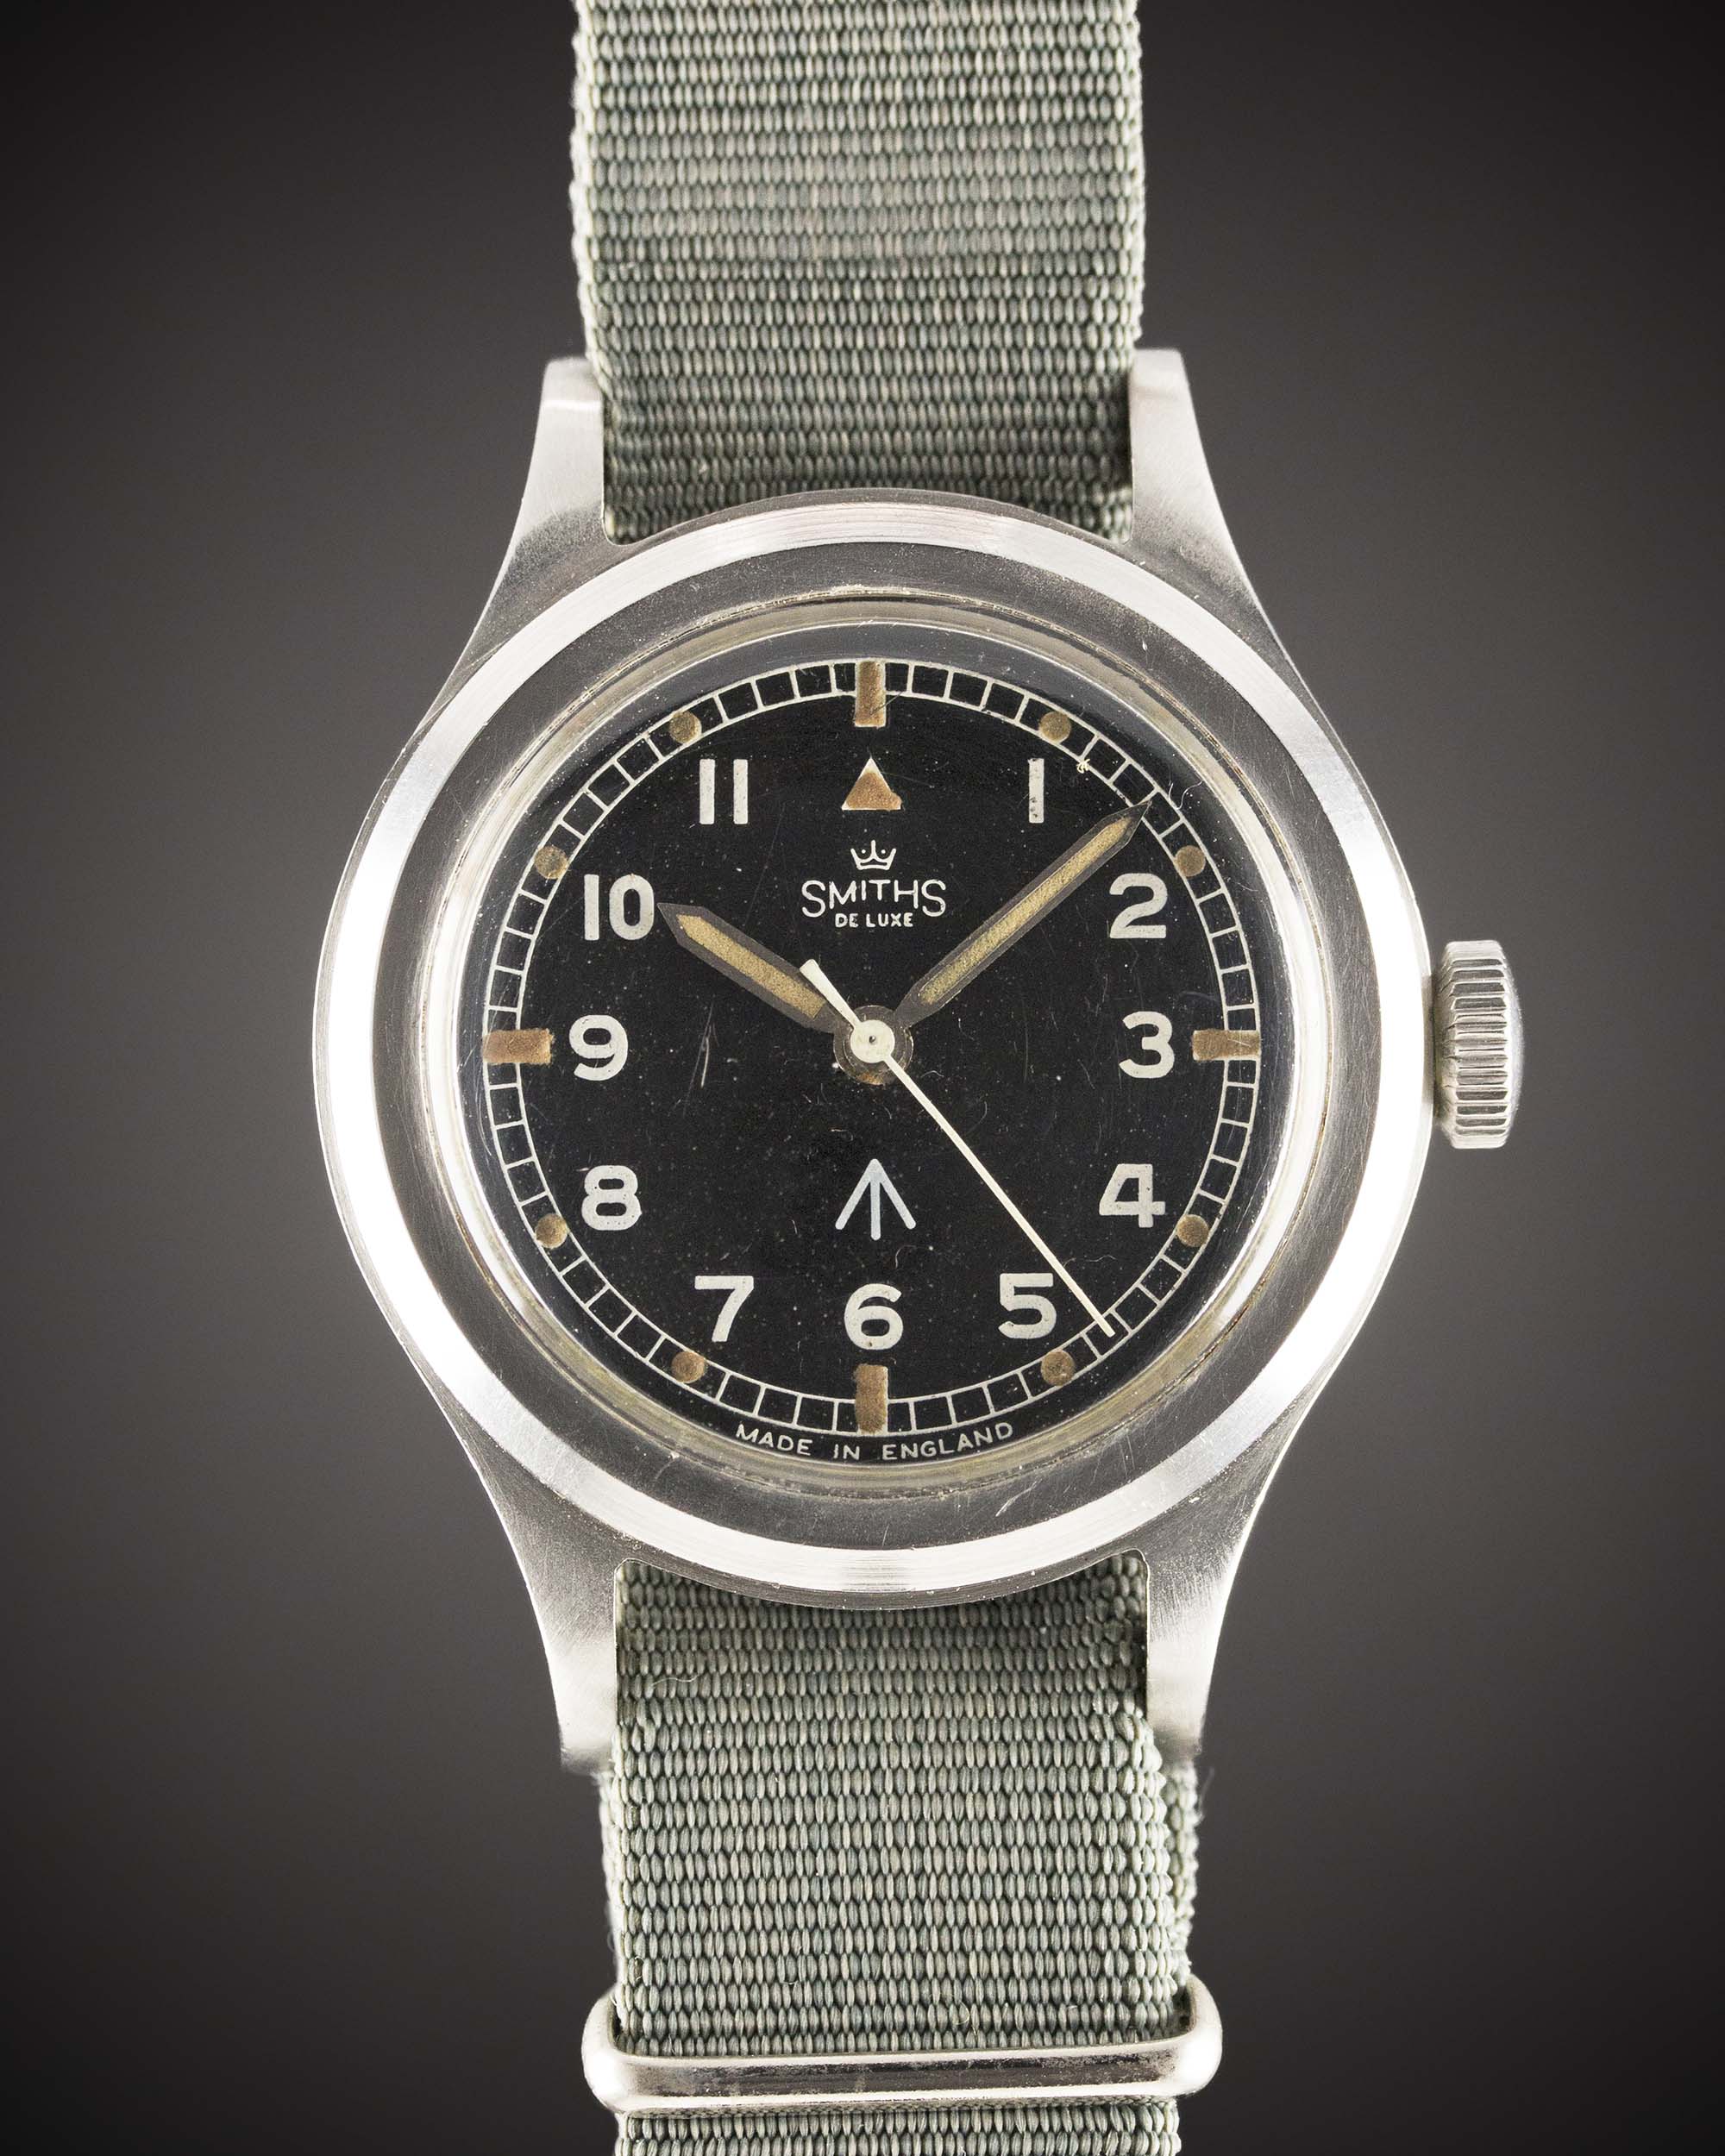 A VERY RARE GENTLEMAN'S STAINLESS STEEL AUSTRALIAN MILITARY SMITHS DE LUXE WRIST WATCH DATED 1961, - Image 3 of 11